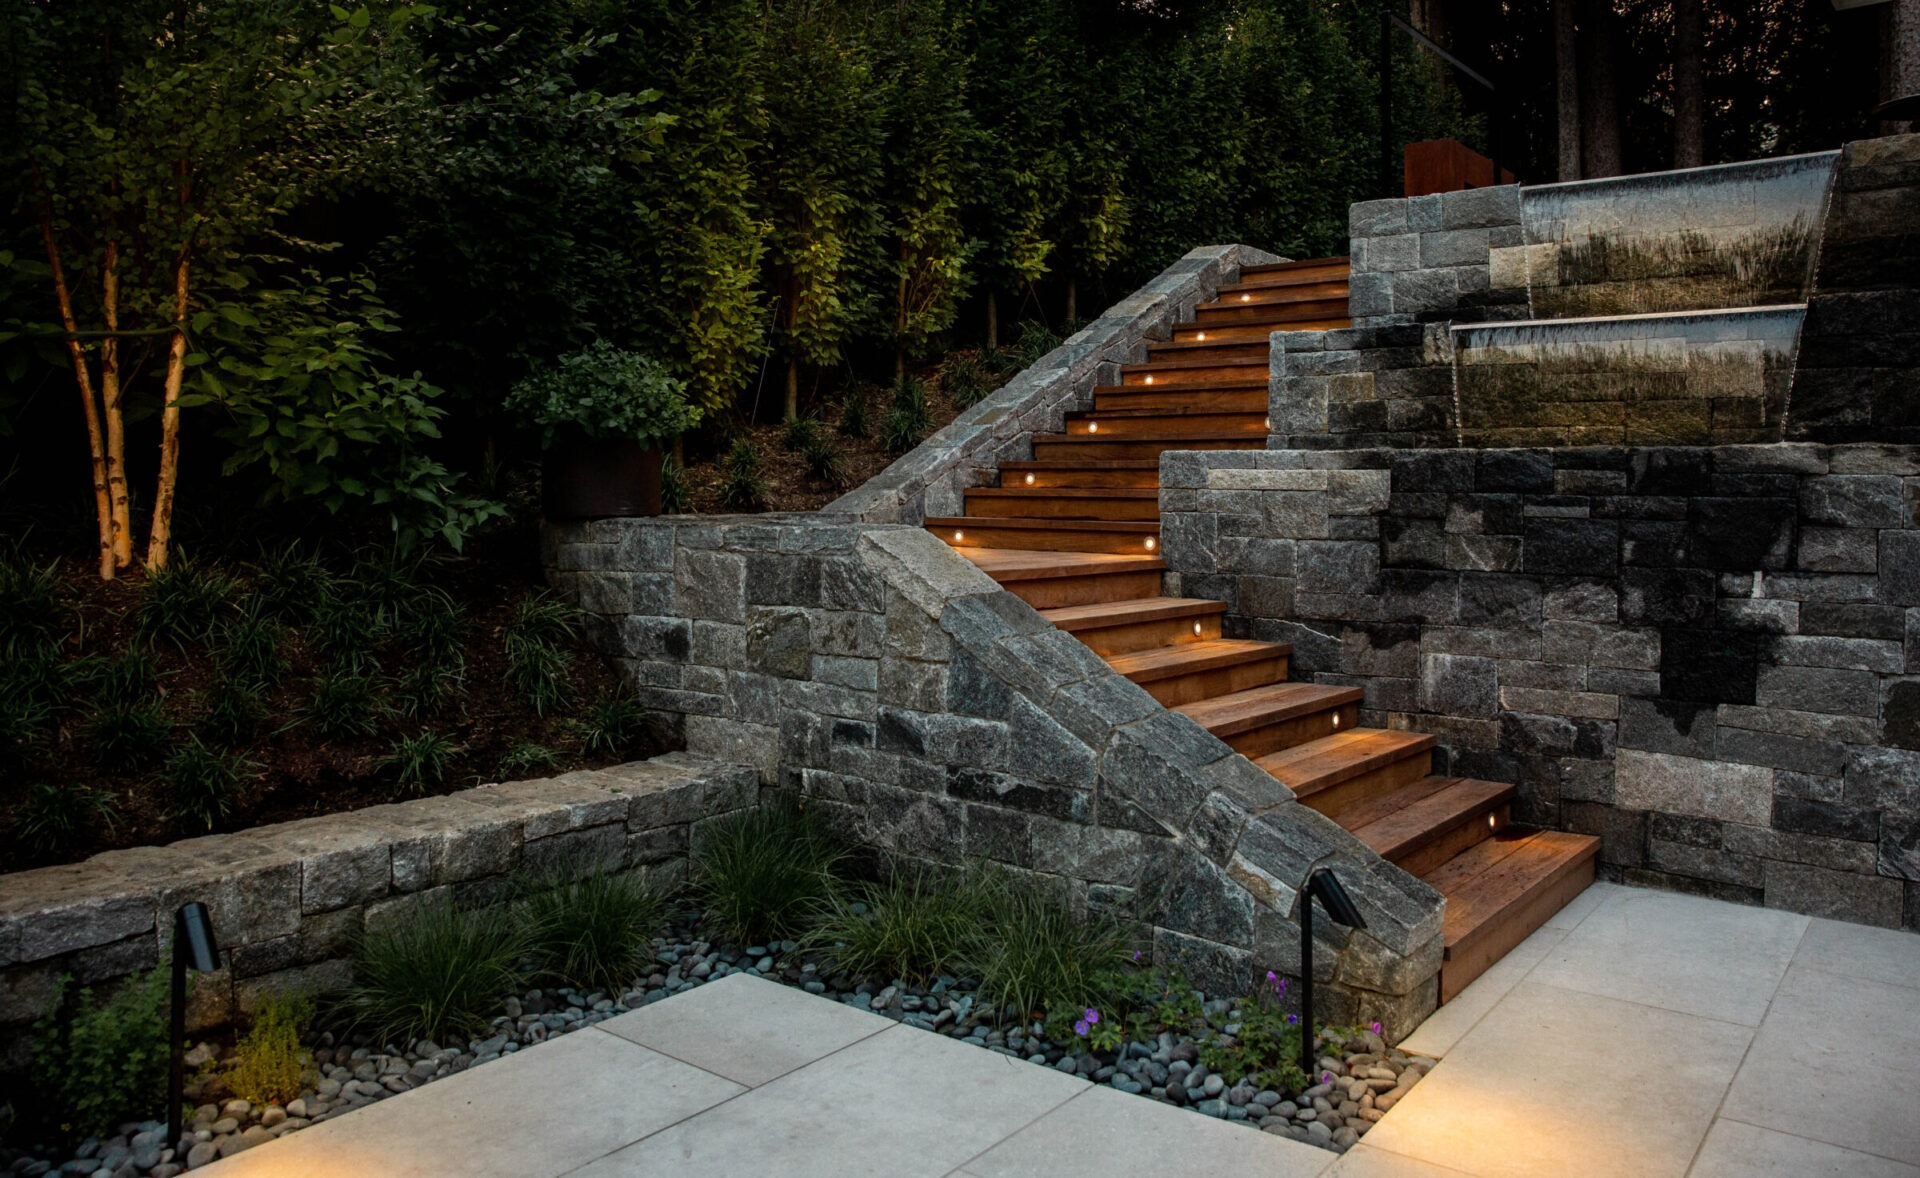 An outdoor staircase with wooden steps and stone walls, illuminated by embedded lights, surrounded by lush plants, and leading to a garden area.